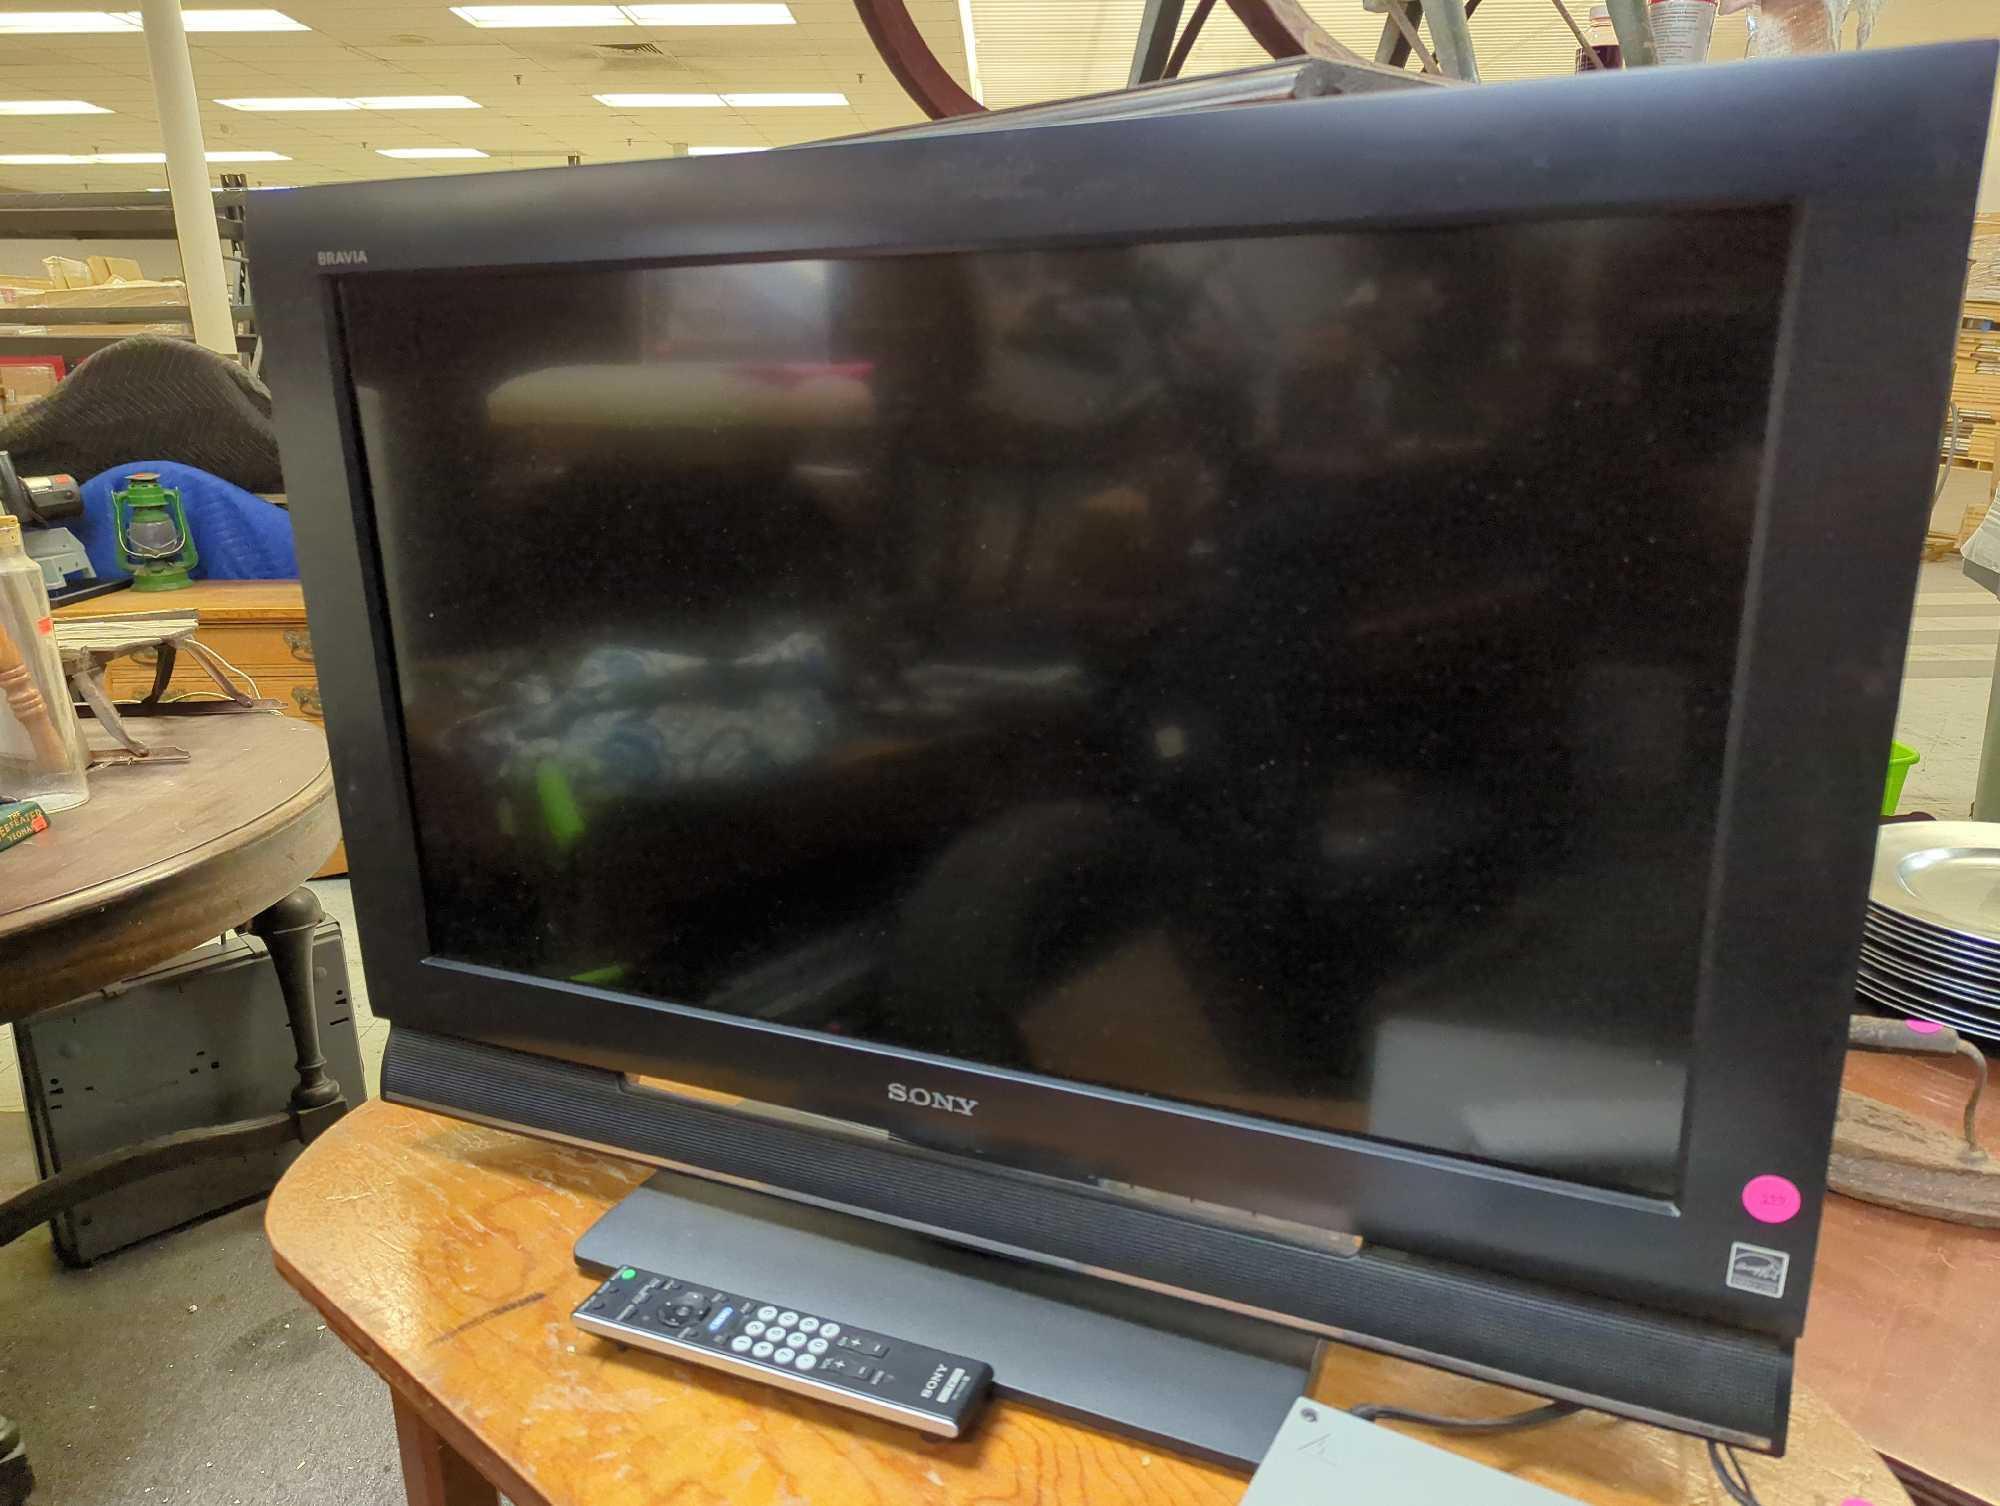 31" Bravia Sony black TV with remote. Comes as is shown in photos. Appears to be used. Model #